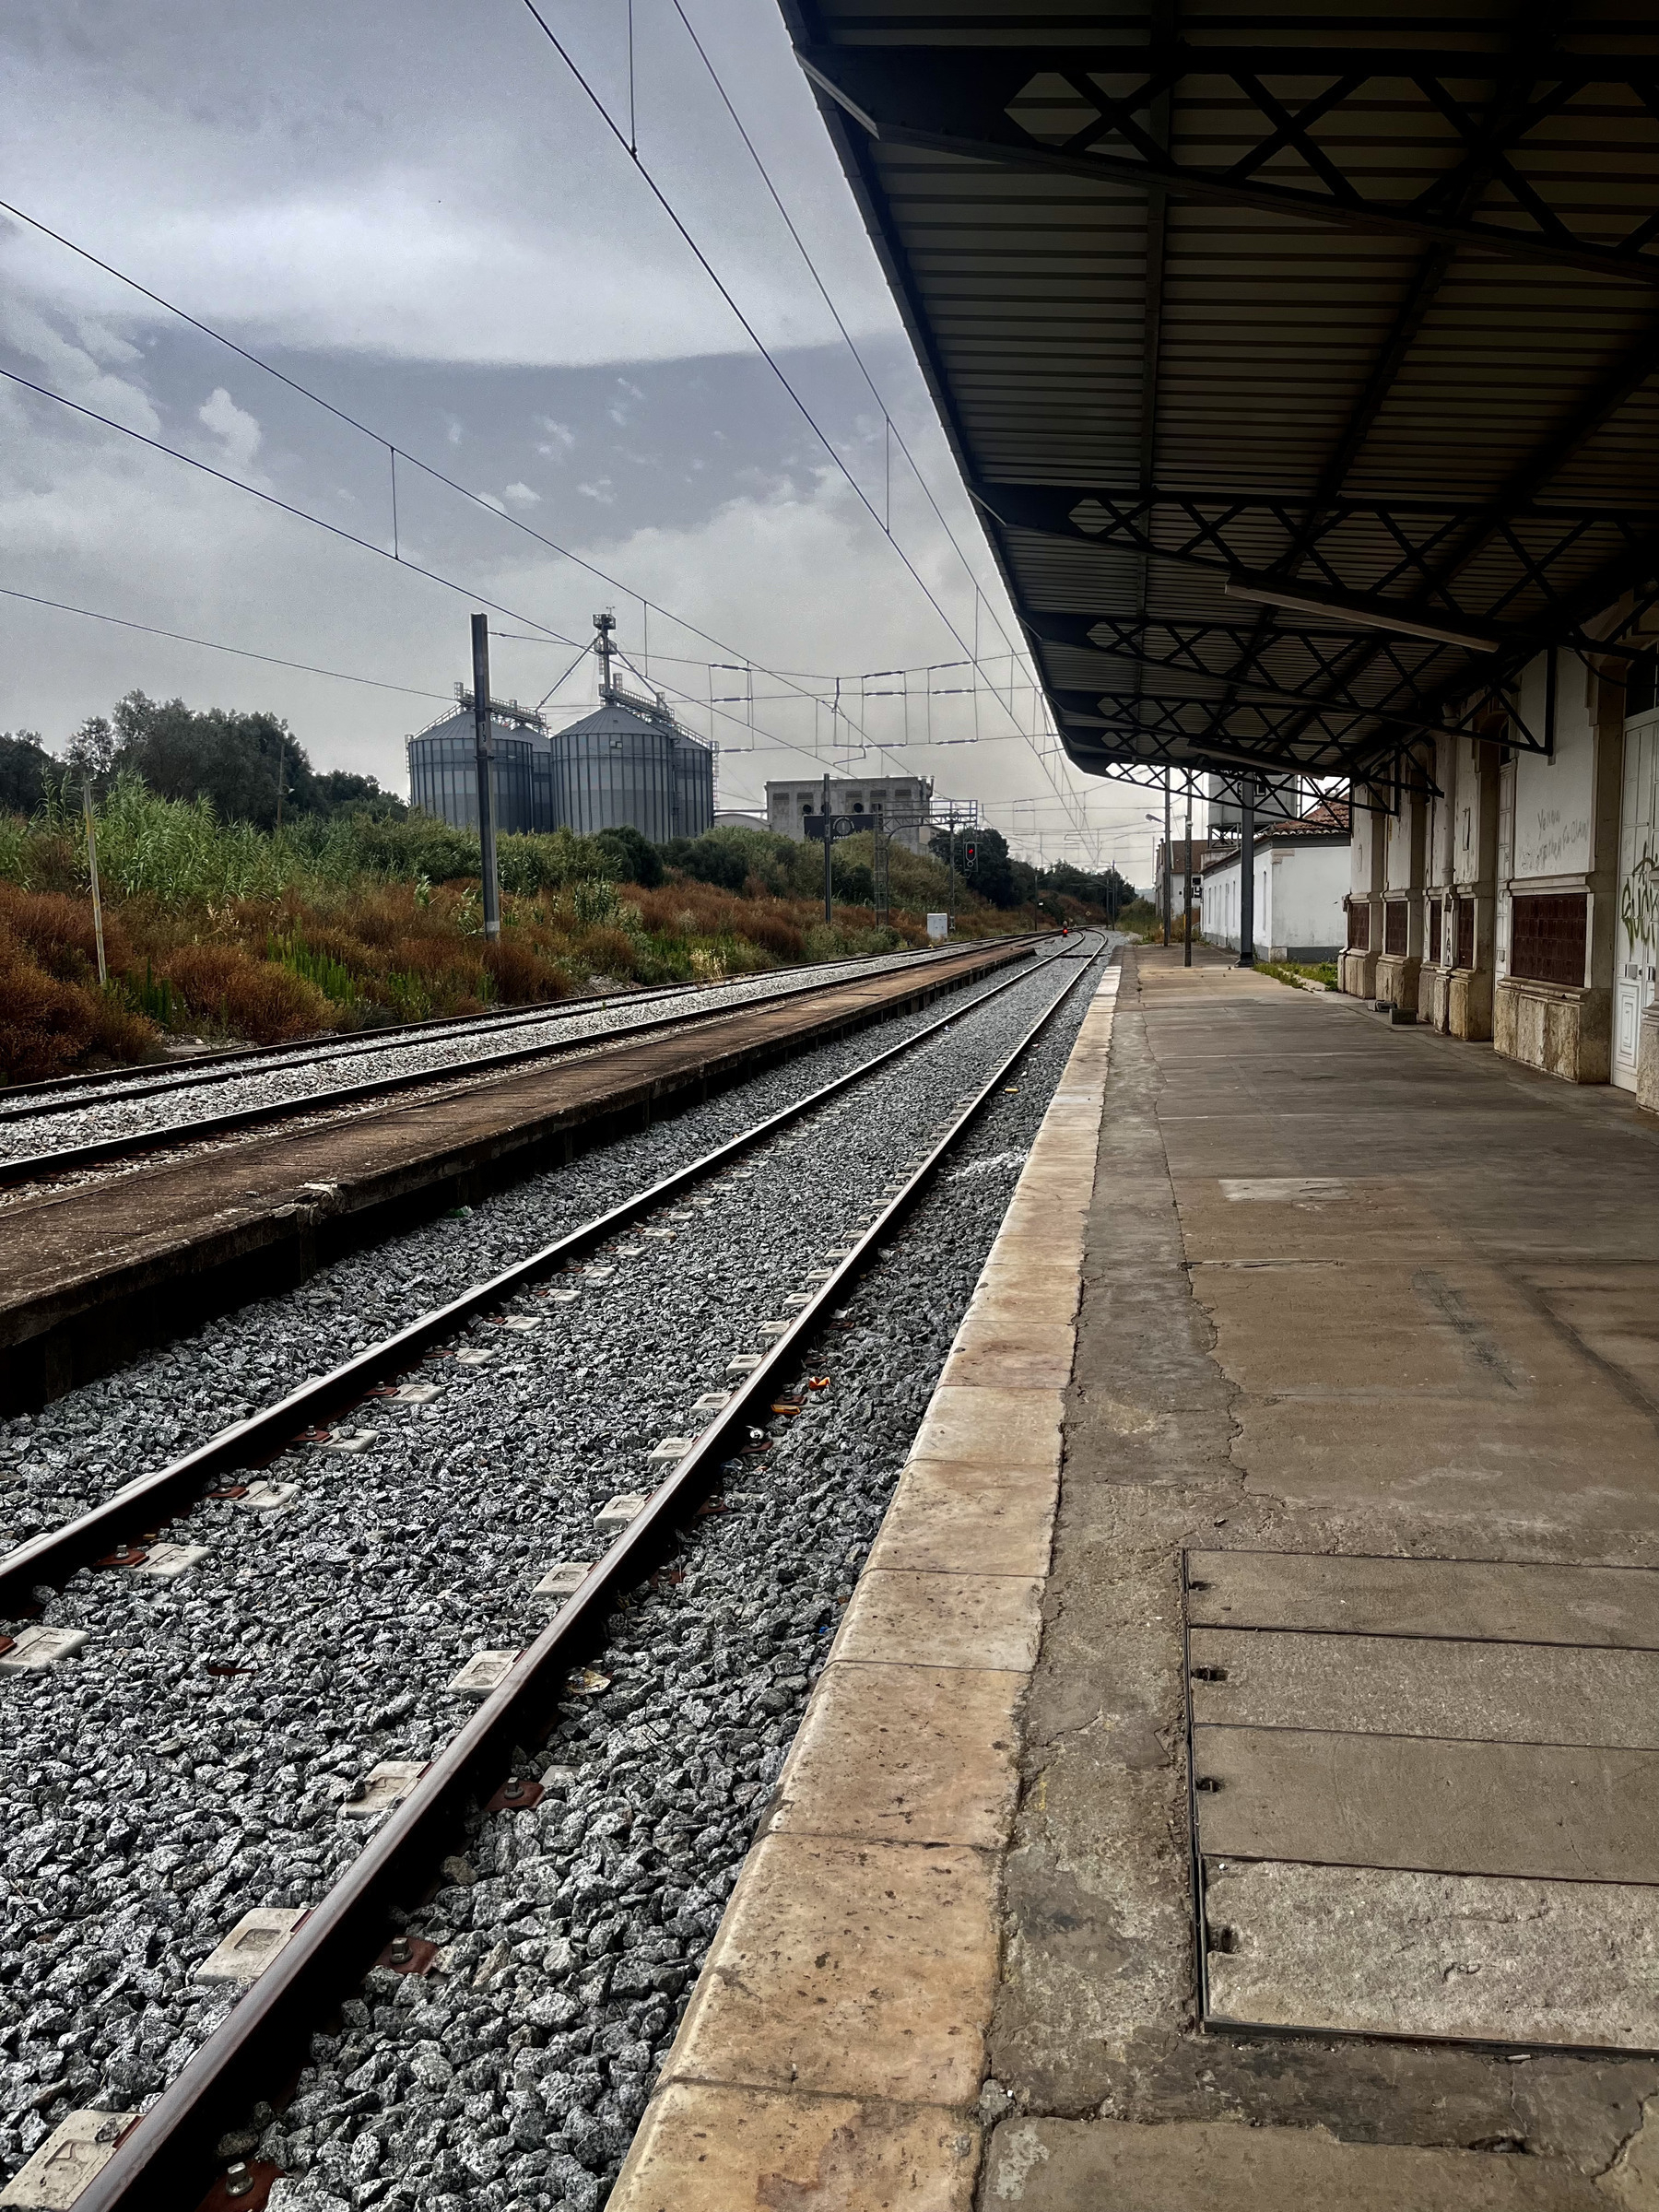 Taken in a railway station. Train tracks disappear into the distance from a covered platform. On the far side is a grass bank. In the distance some silos, maybe rice silos.